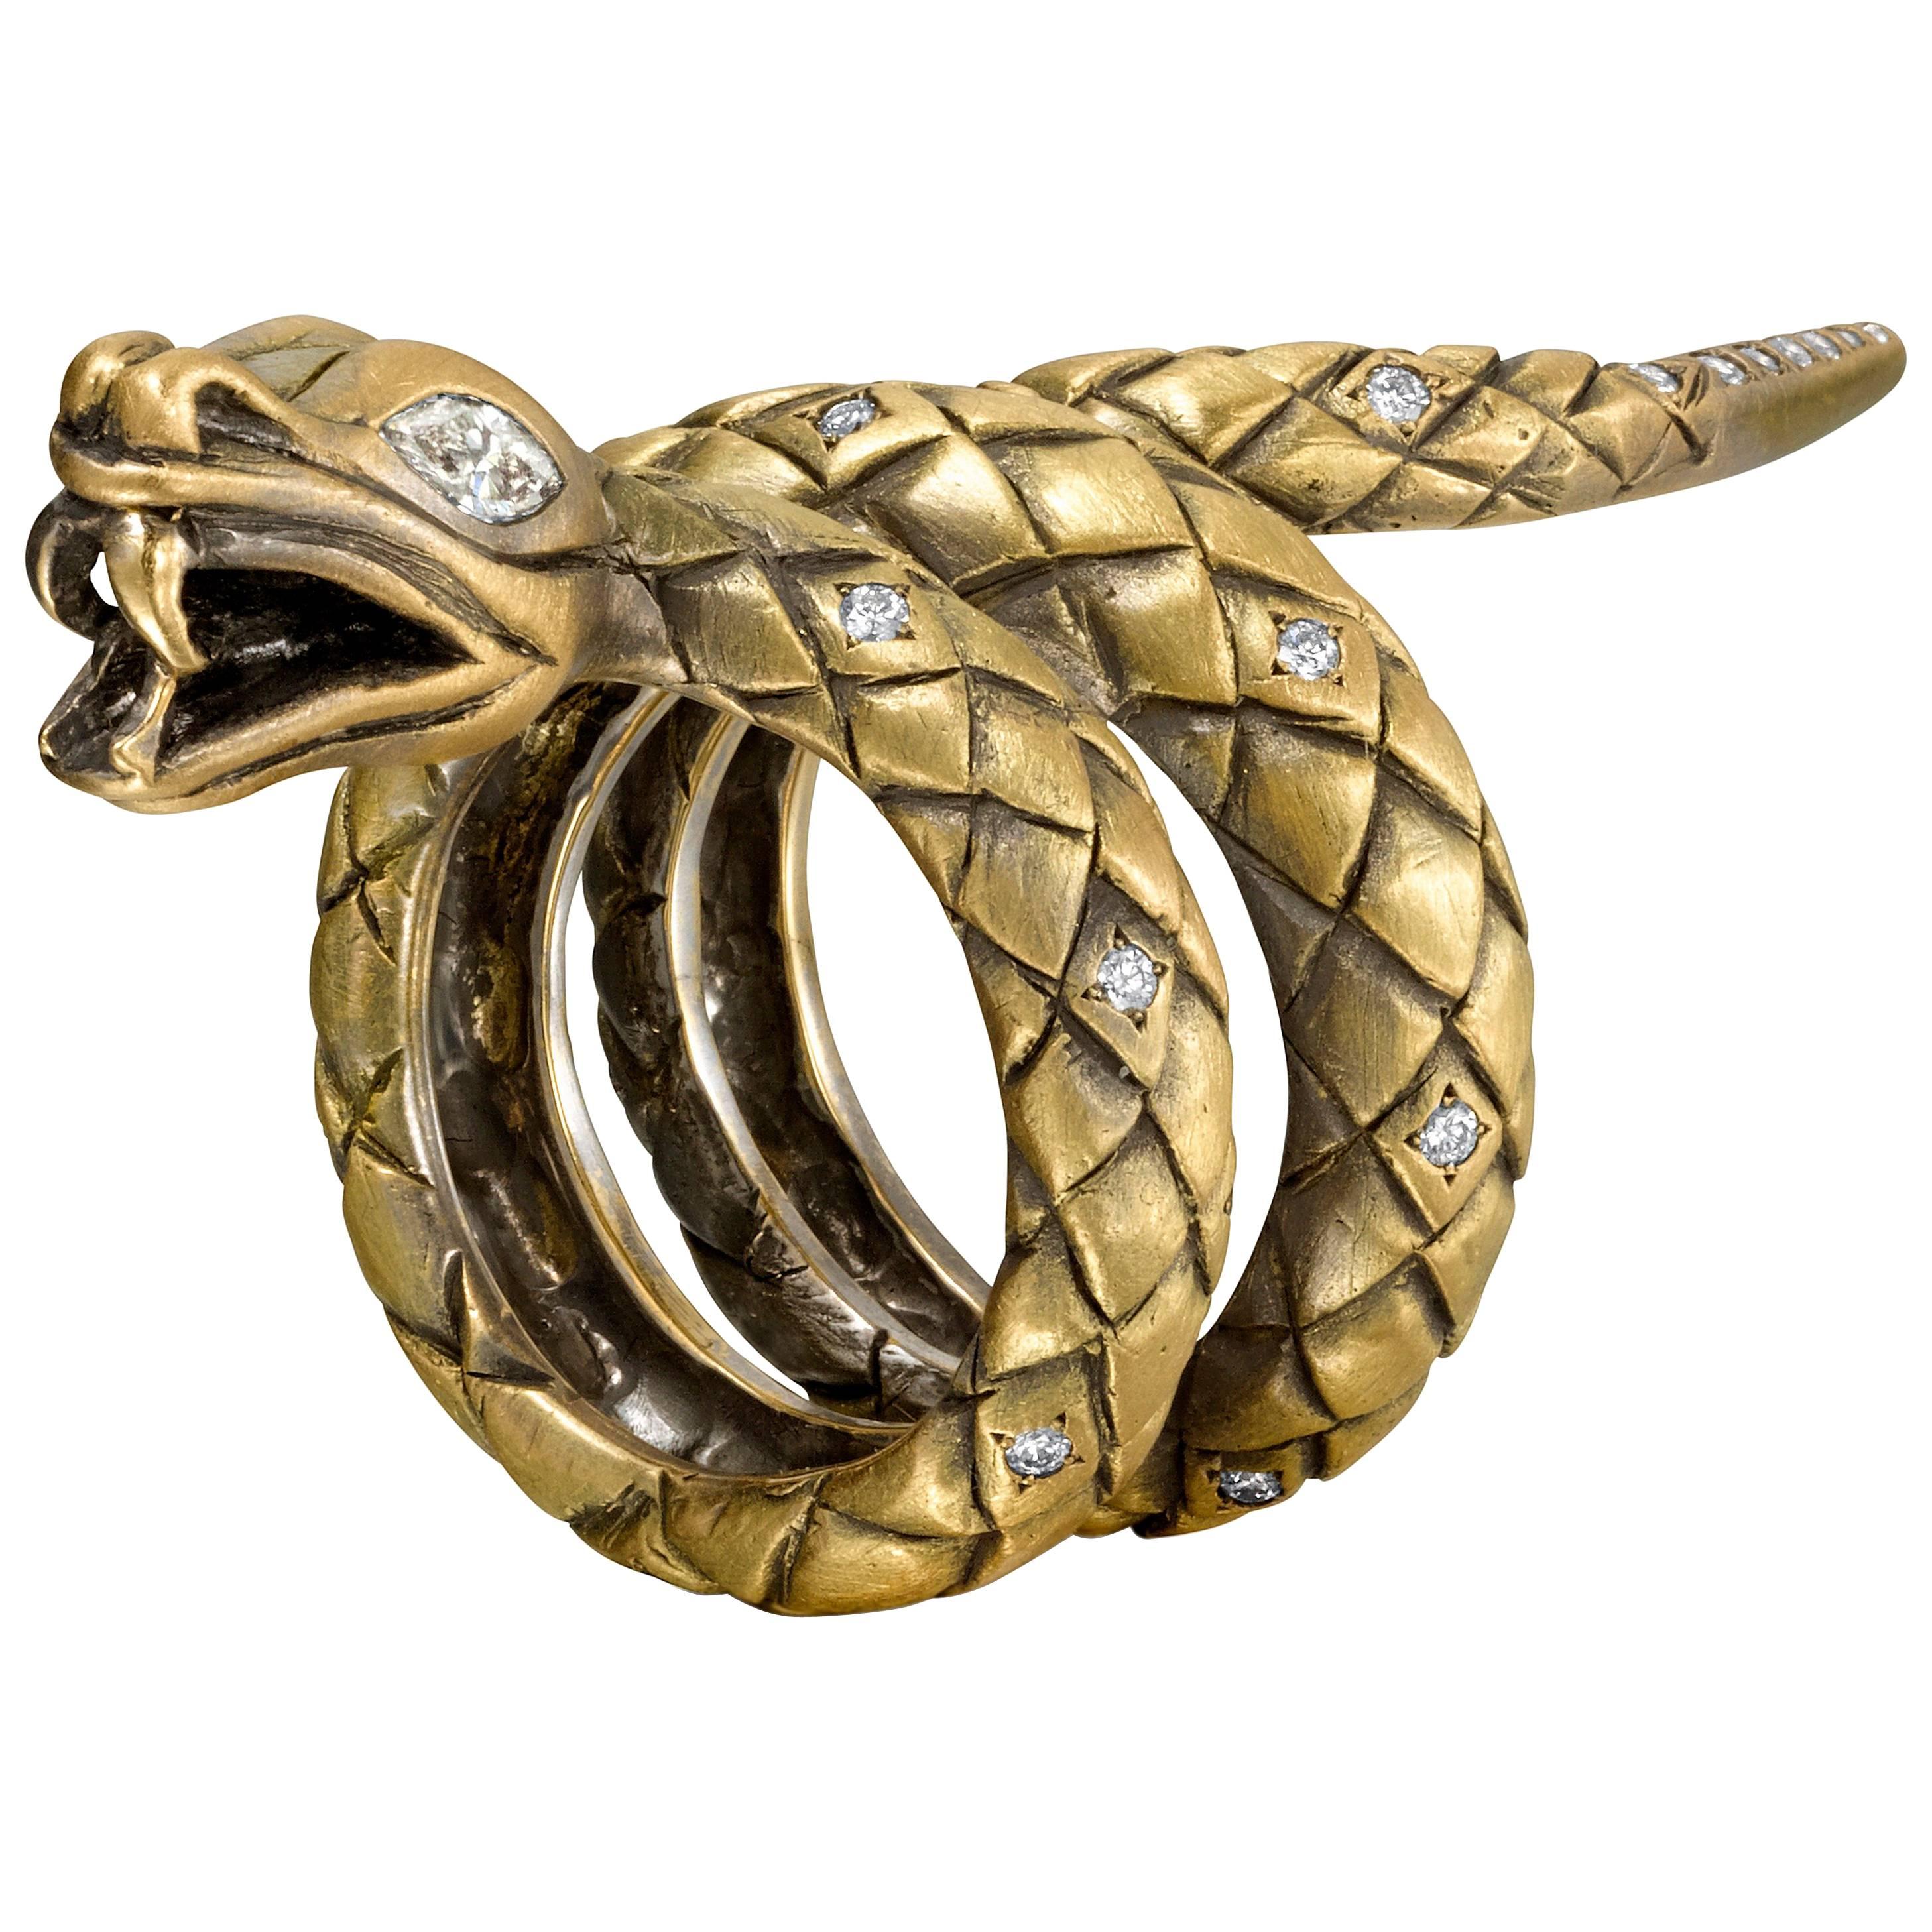 Wendy Brandes 18K Gold Snake Ring With Diamond Accents